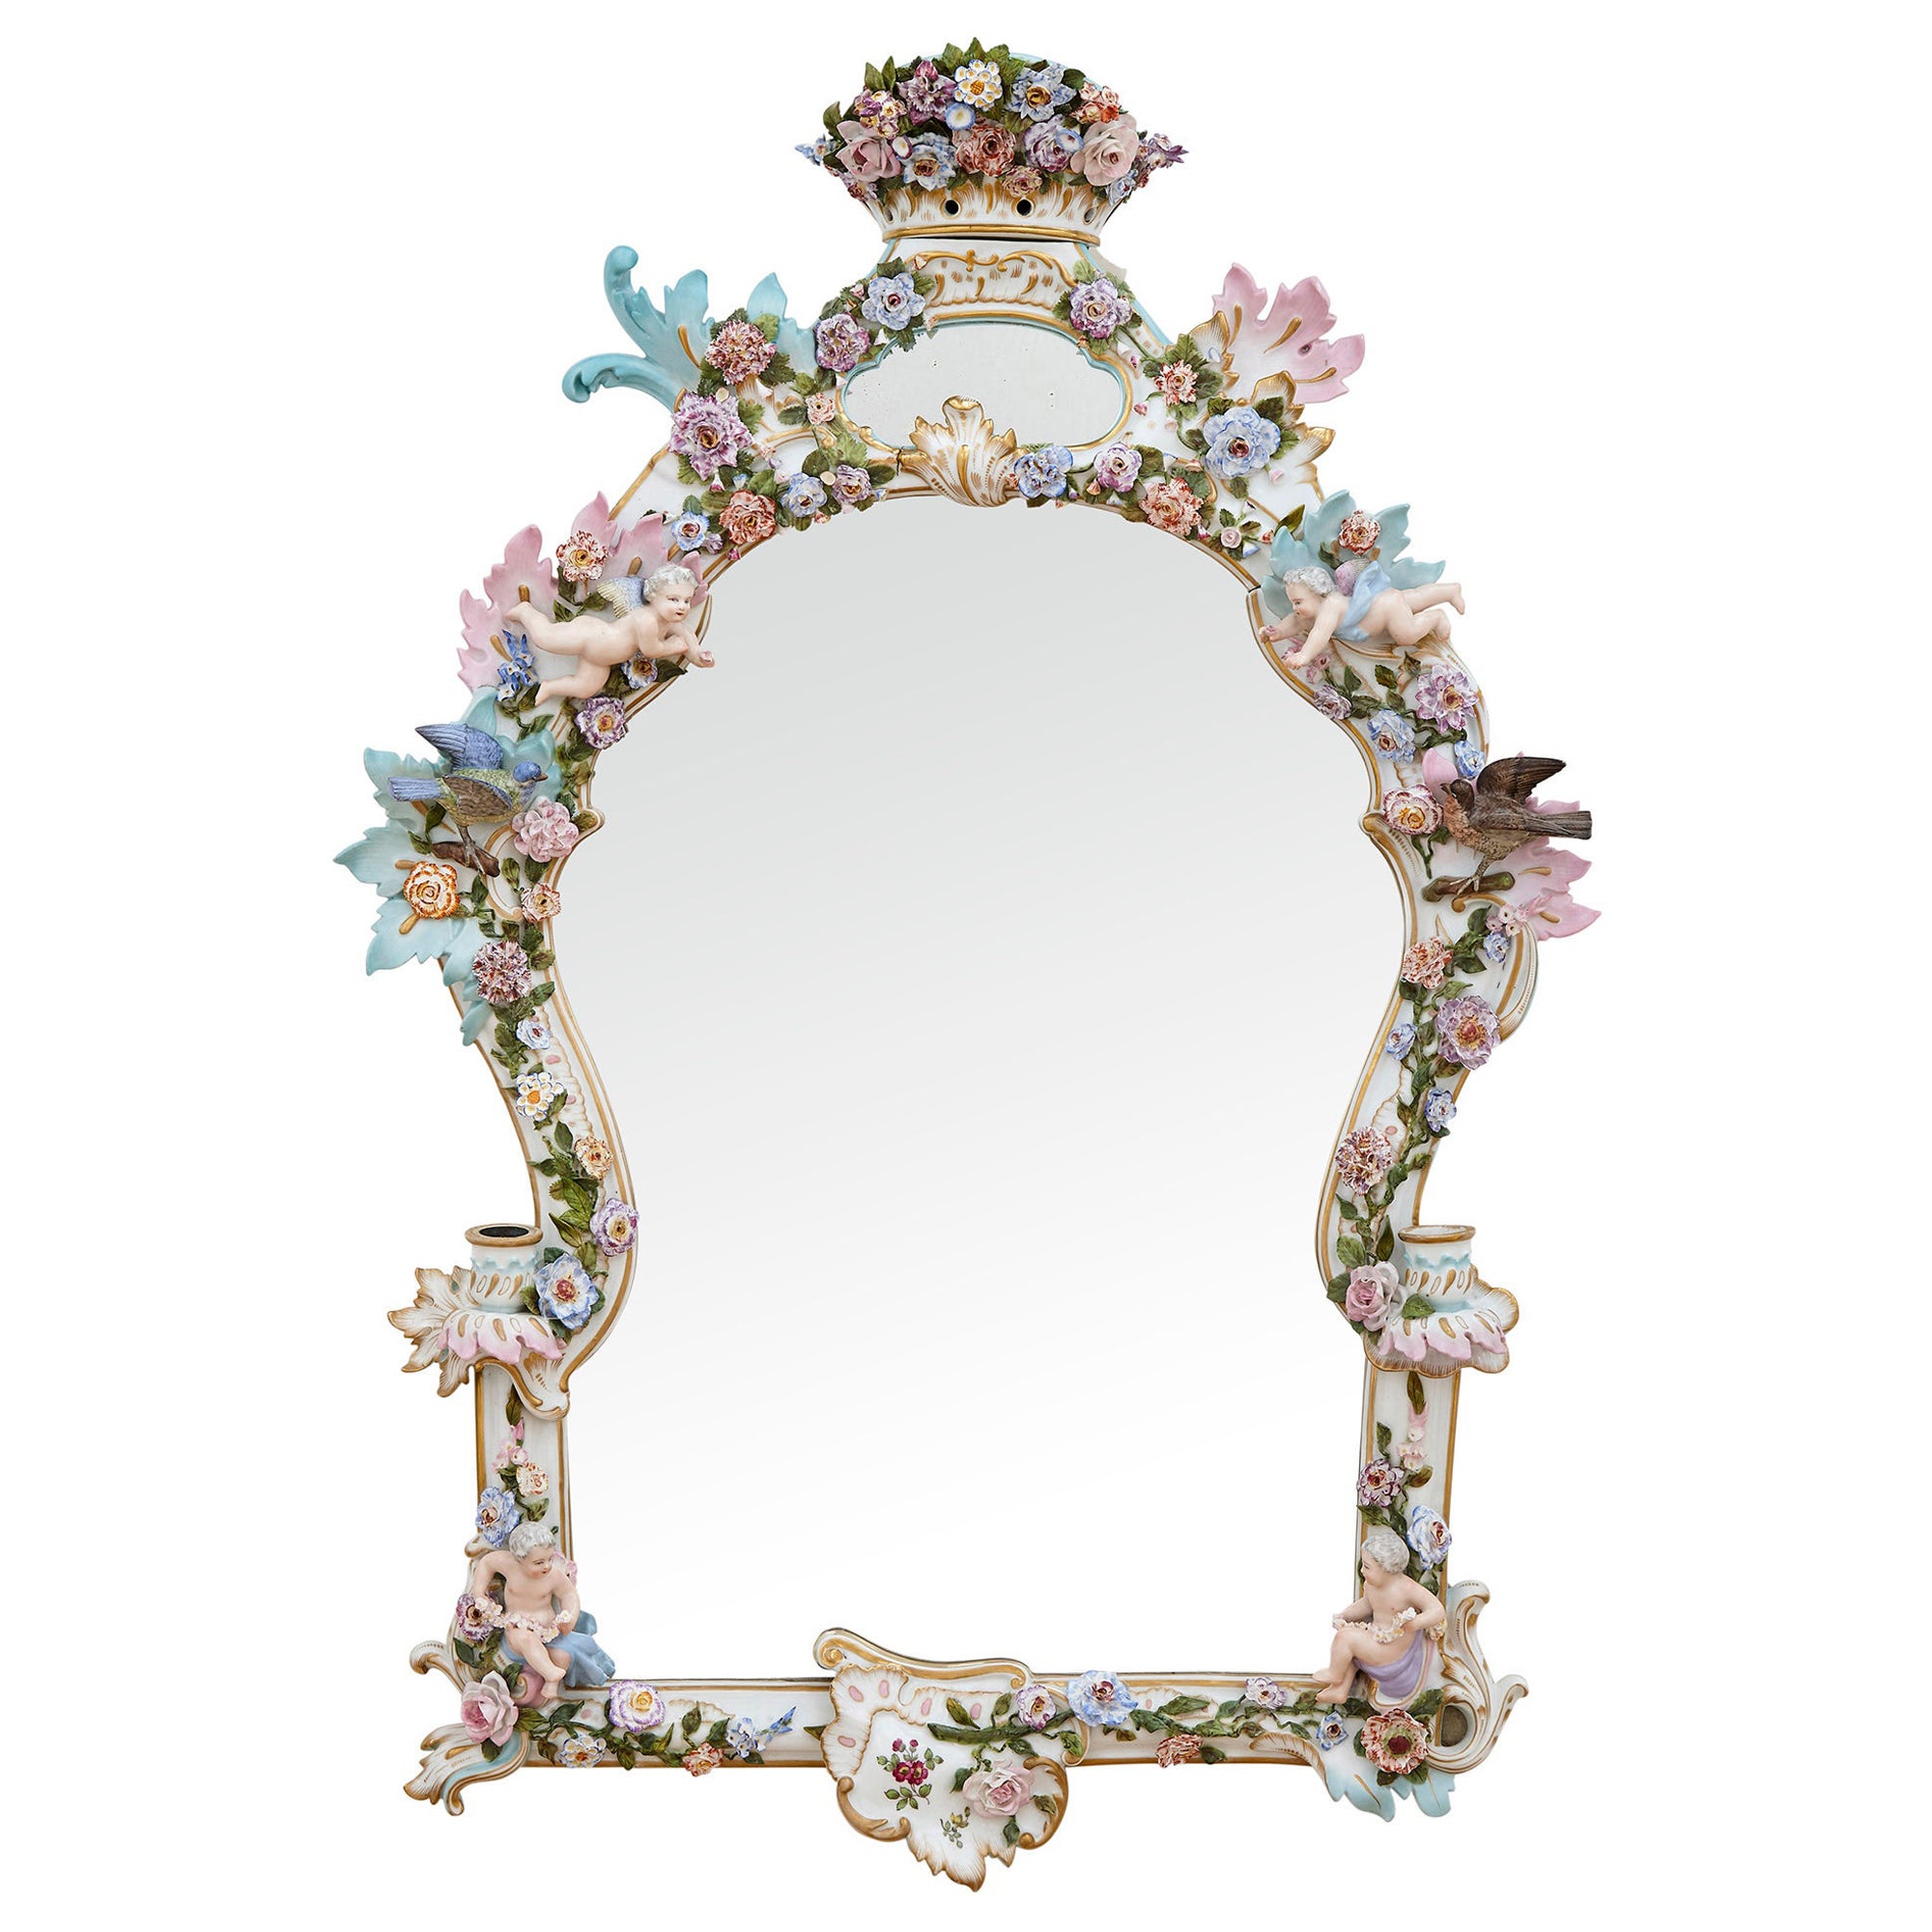 Antique Rococo Style Porcelain Mirror by Meissen